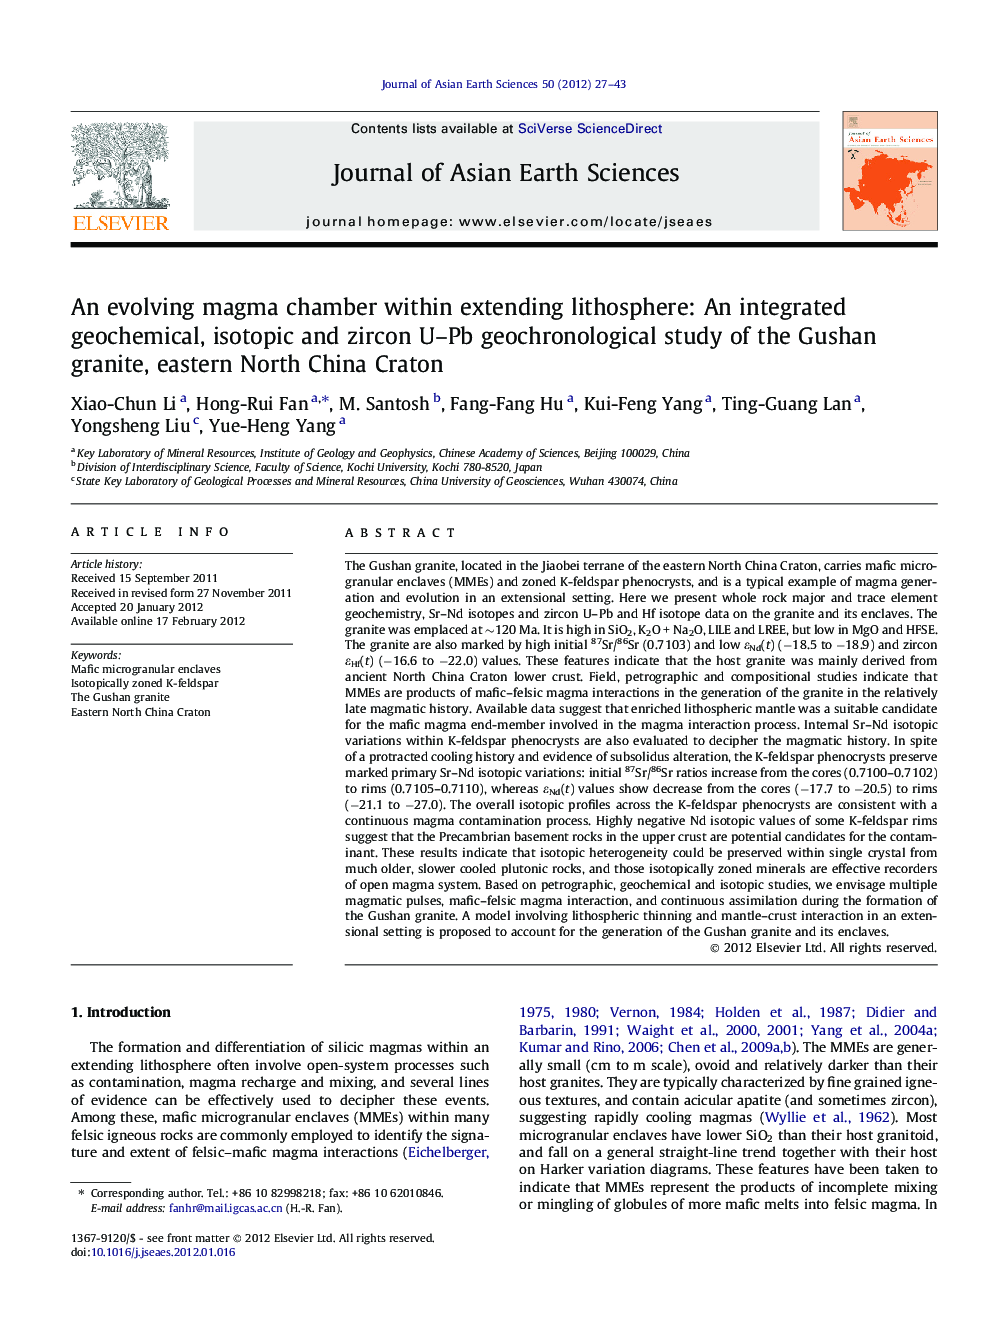 An evolving magma chamber within extending lithosphere: An integrated geochemical, isotopic and zircon U-Pb geochronological study of the Gushan granite, eastern North China Craton